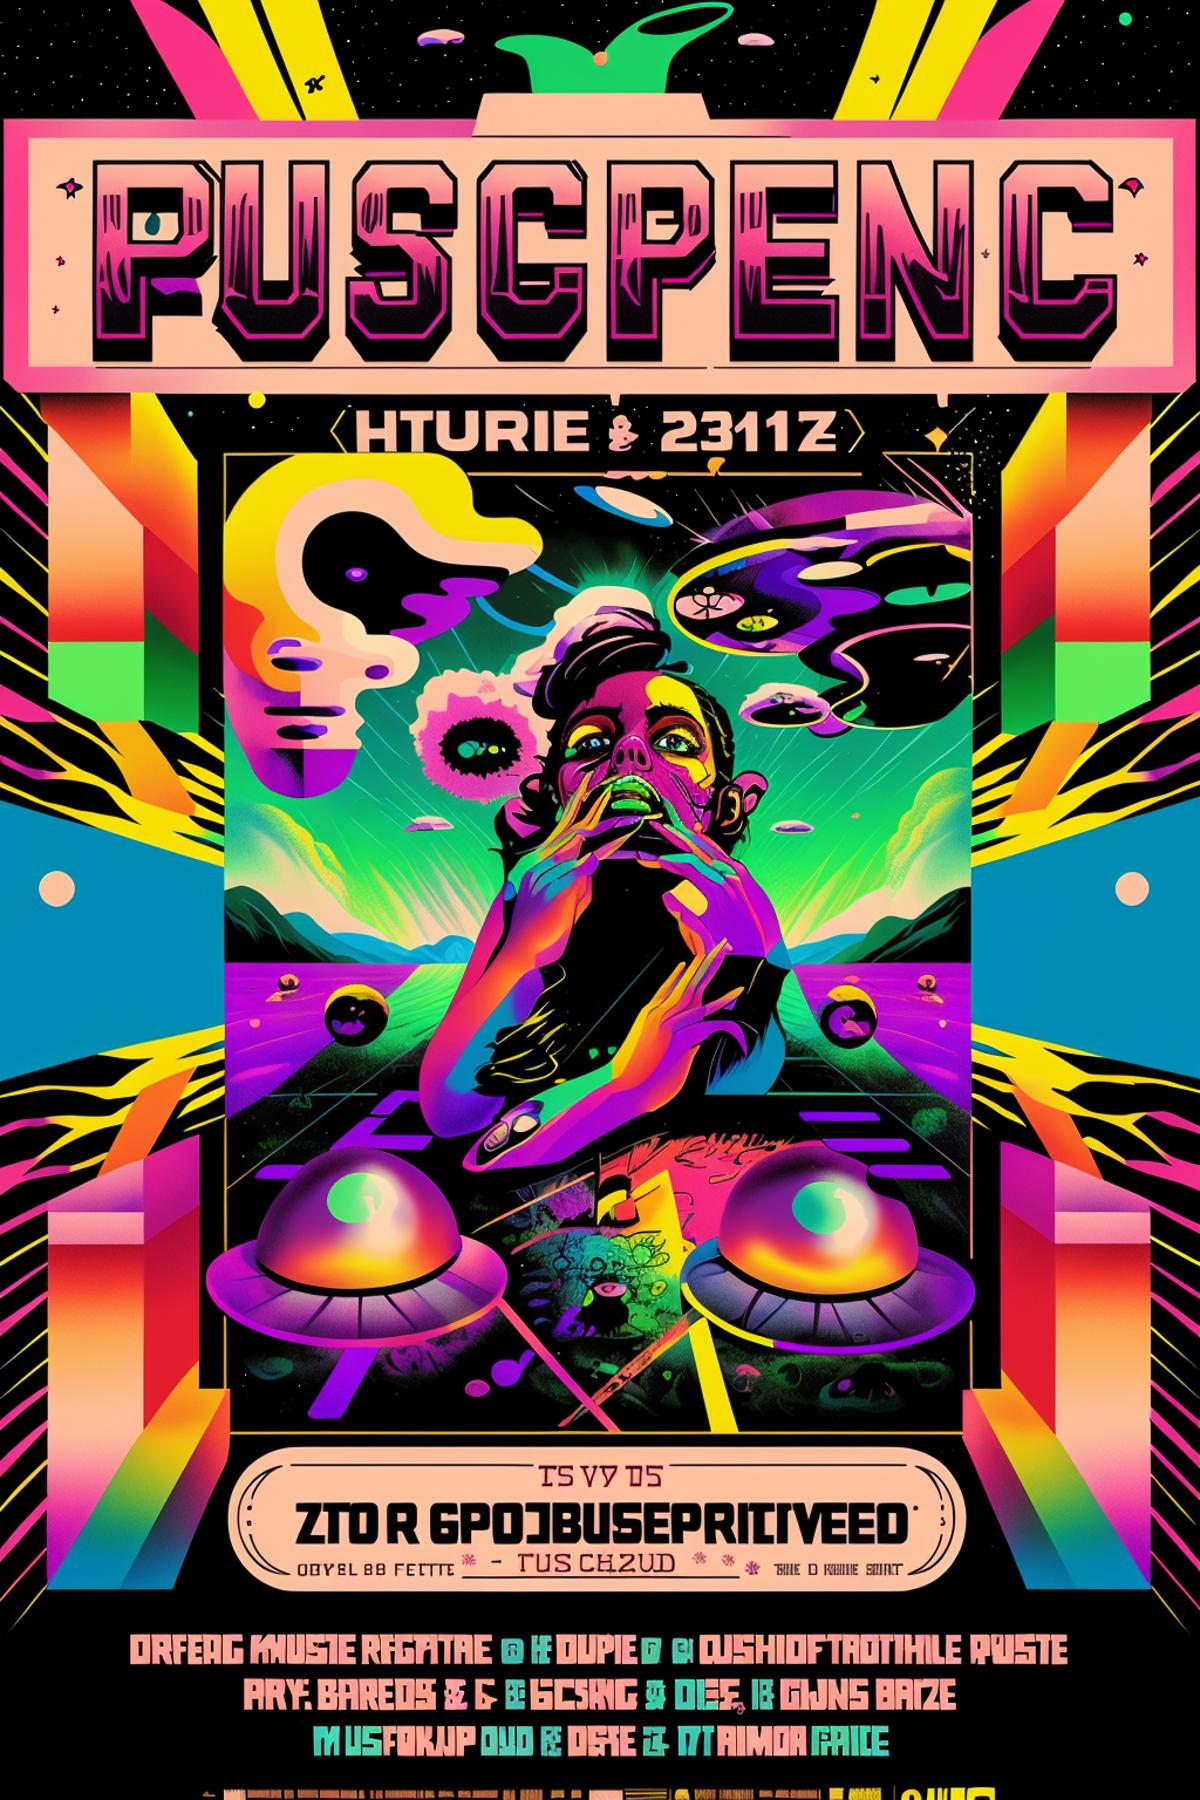 Psychedelic Poster image by Ciro_Negrogni